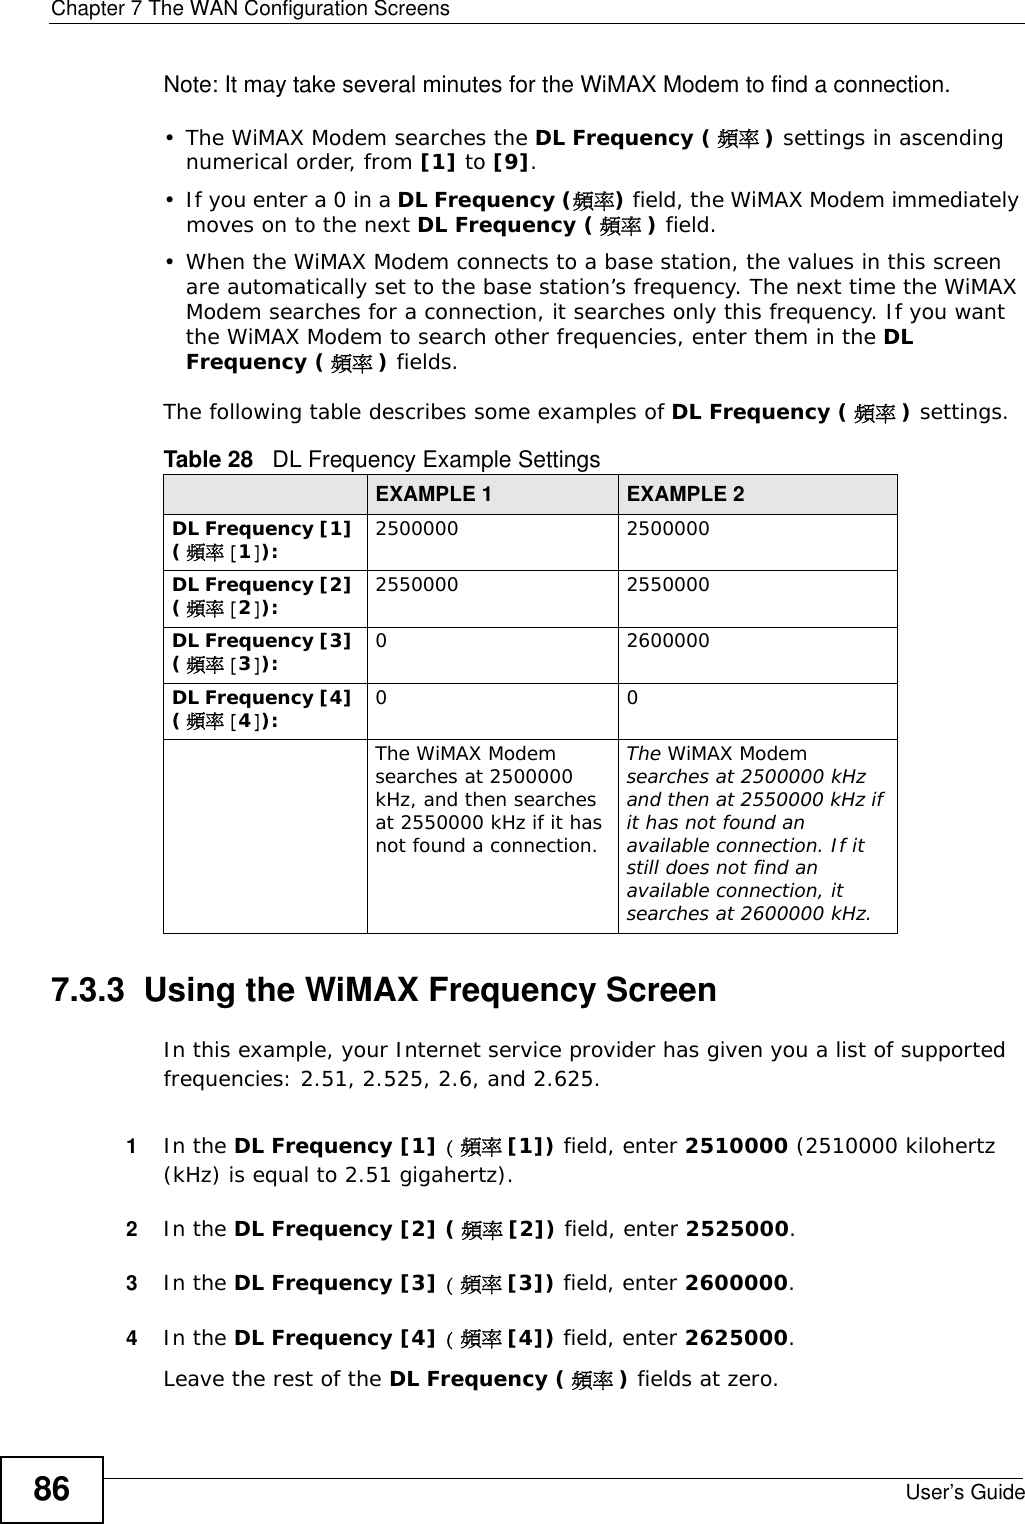 Chapter 7 The WAN Configuration ScreensUser’s Guide86Note: It may take several minutes for the WiMAX Modem to find a connection.• The WiMAX Modem searches the DL Frequency ( 頻率 ) settings in ascending numerical order, from [1] to [9].• If you enter a 0 in a DL Frequency (頻率) field, the WiMAX Modem immediately moves on to the next DL Frequency ( 頻率 ) field.• When the WiMAX Modem connects to a base station, the values in this screen are automatically set to the base station’s frequency. The next time the WiMAX Modem searches for a connection, it searches only this frequency. If you want the WiMAX Modem to search other frequencies, enter them in the DL Frequency ( 頻率 ) fields.The following table describes some examples of DL Frequency ( 頻率 ) settings.7.3.3  Using the WiMAX Frequency ScreenIn this example, your Internet service provider has given you a list of supported frequencies: 2.51, 2.525, 2.6, and 2.625. 1In the DL Frequency [1] (頻率[1]) field, enter 2510000 (2510000 kilohertz (kHz) is equal to 2.51 gigahertz).2In the DL Frequency [2] (頻率 [2]) field, enter 2525000.3In the DL Frequency [3] (頻率[3]) field, enter 2600000.4In the DL Frequency [4] (頻率[4]) field, enter 2625000.Leave the rest of the DL Frequency ( 頻率 ) fields at zero. Table 28   DL Frequency Example SettingsEXAMPLE 1 EXAMPLE 2DL Frequency [1] (頻率 [1]): 2500000 2500000DL Frequency [2] (頻率 [2]): 2550000 2550000DL Frequency [3] (頻率 [3]): 0 2600000DL Frequency [4] (頻率 [4]): 00The WiMAX Modem searches at 2500000 kHz, and then searches at 2550000 kHz if it has not found a connection.The WiMAX Modem searches at 2500000 kHz and then at 2550000 kHz if it has not found an available connection. If it still does not find an available connection, it searches at 2600000 kHz.